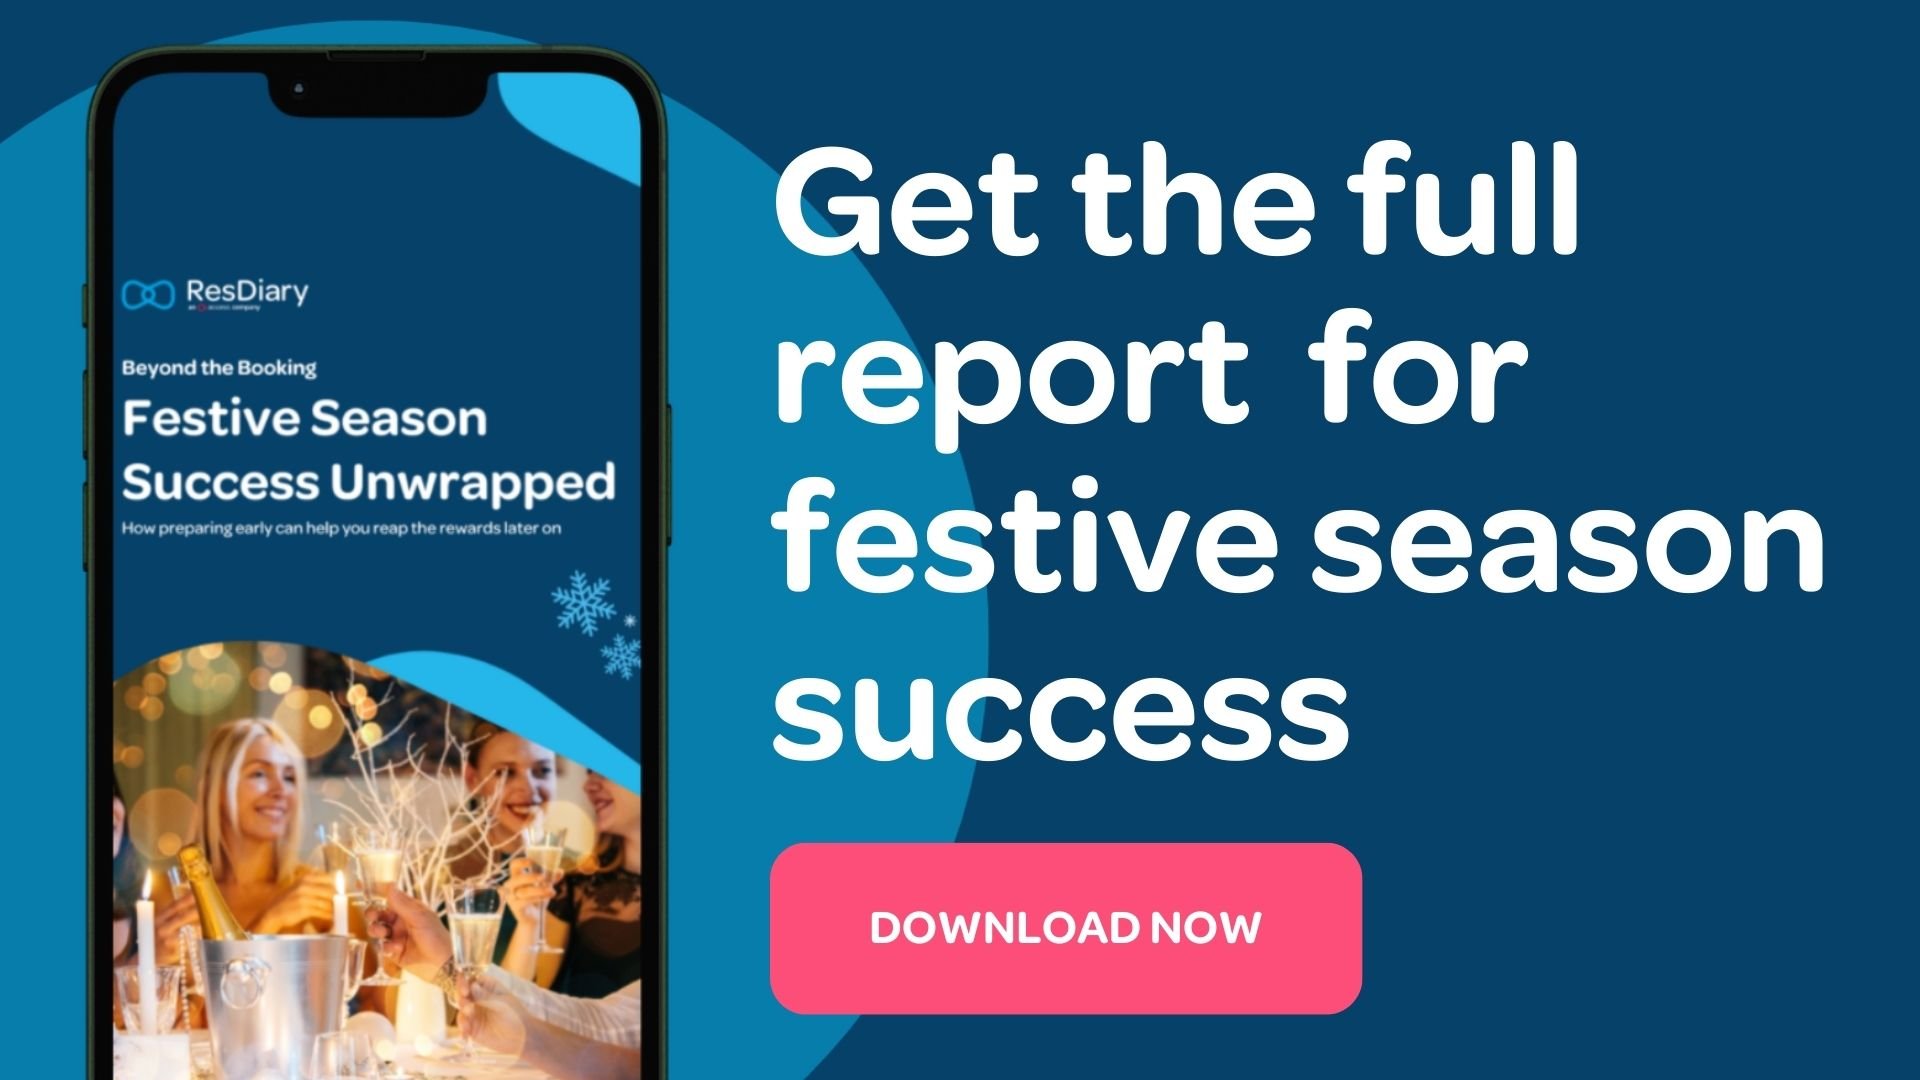 Call to action to download the ResDiary Festive Season Industry Report